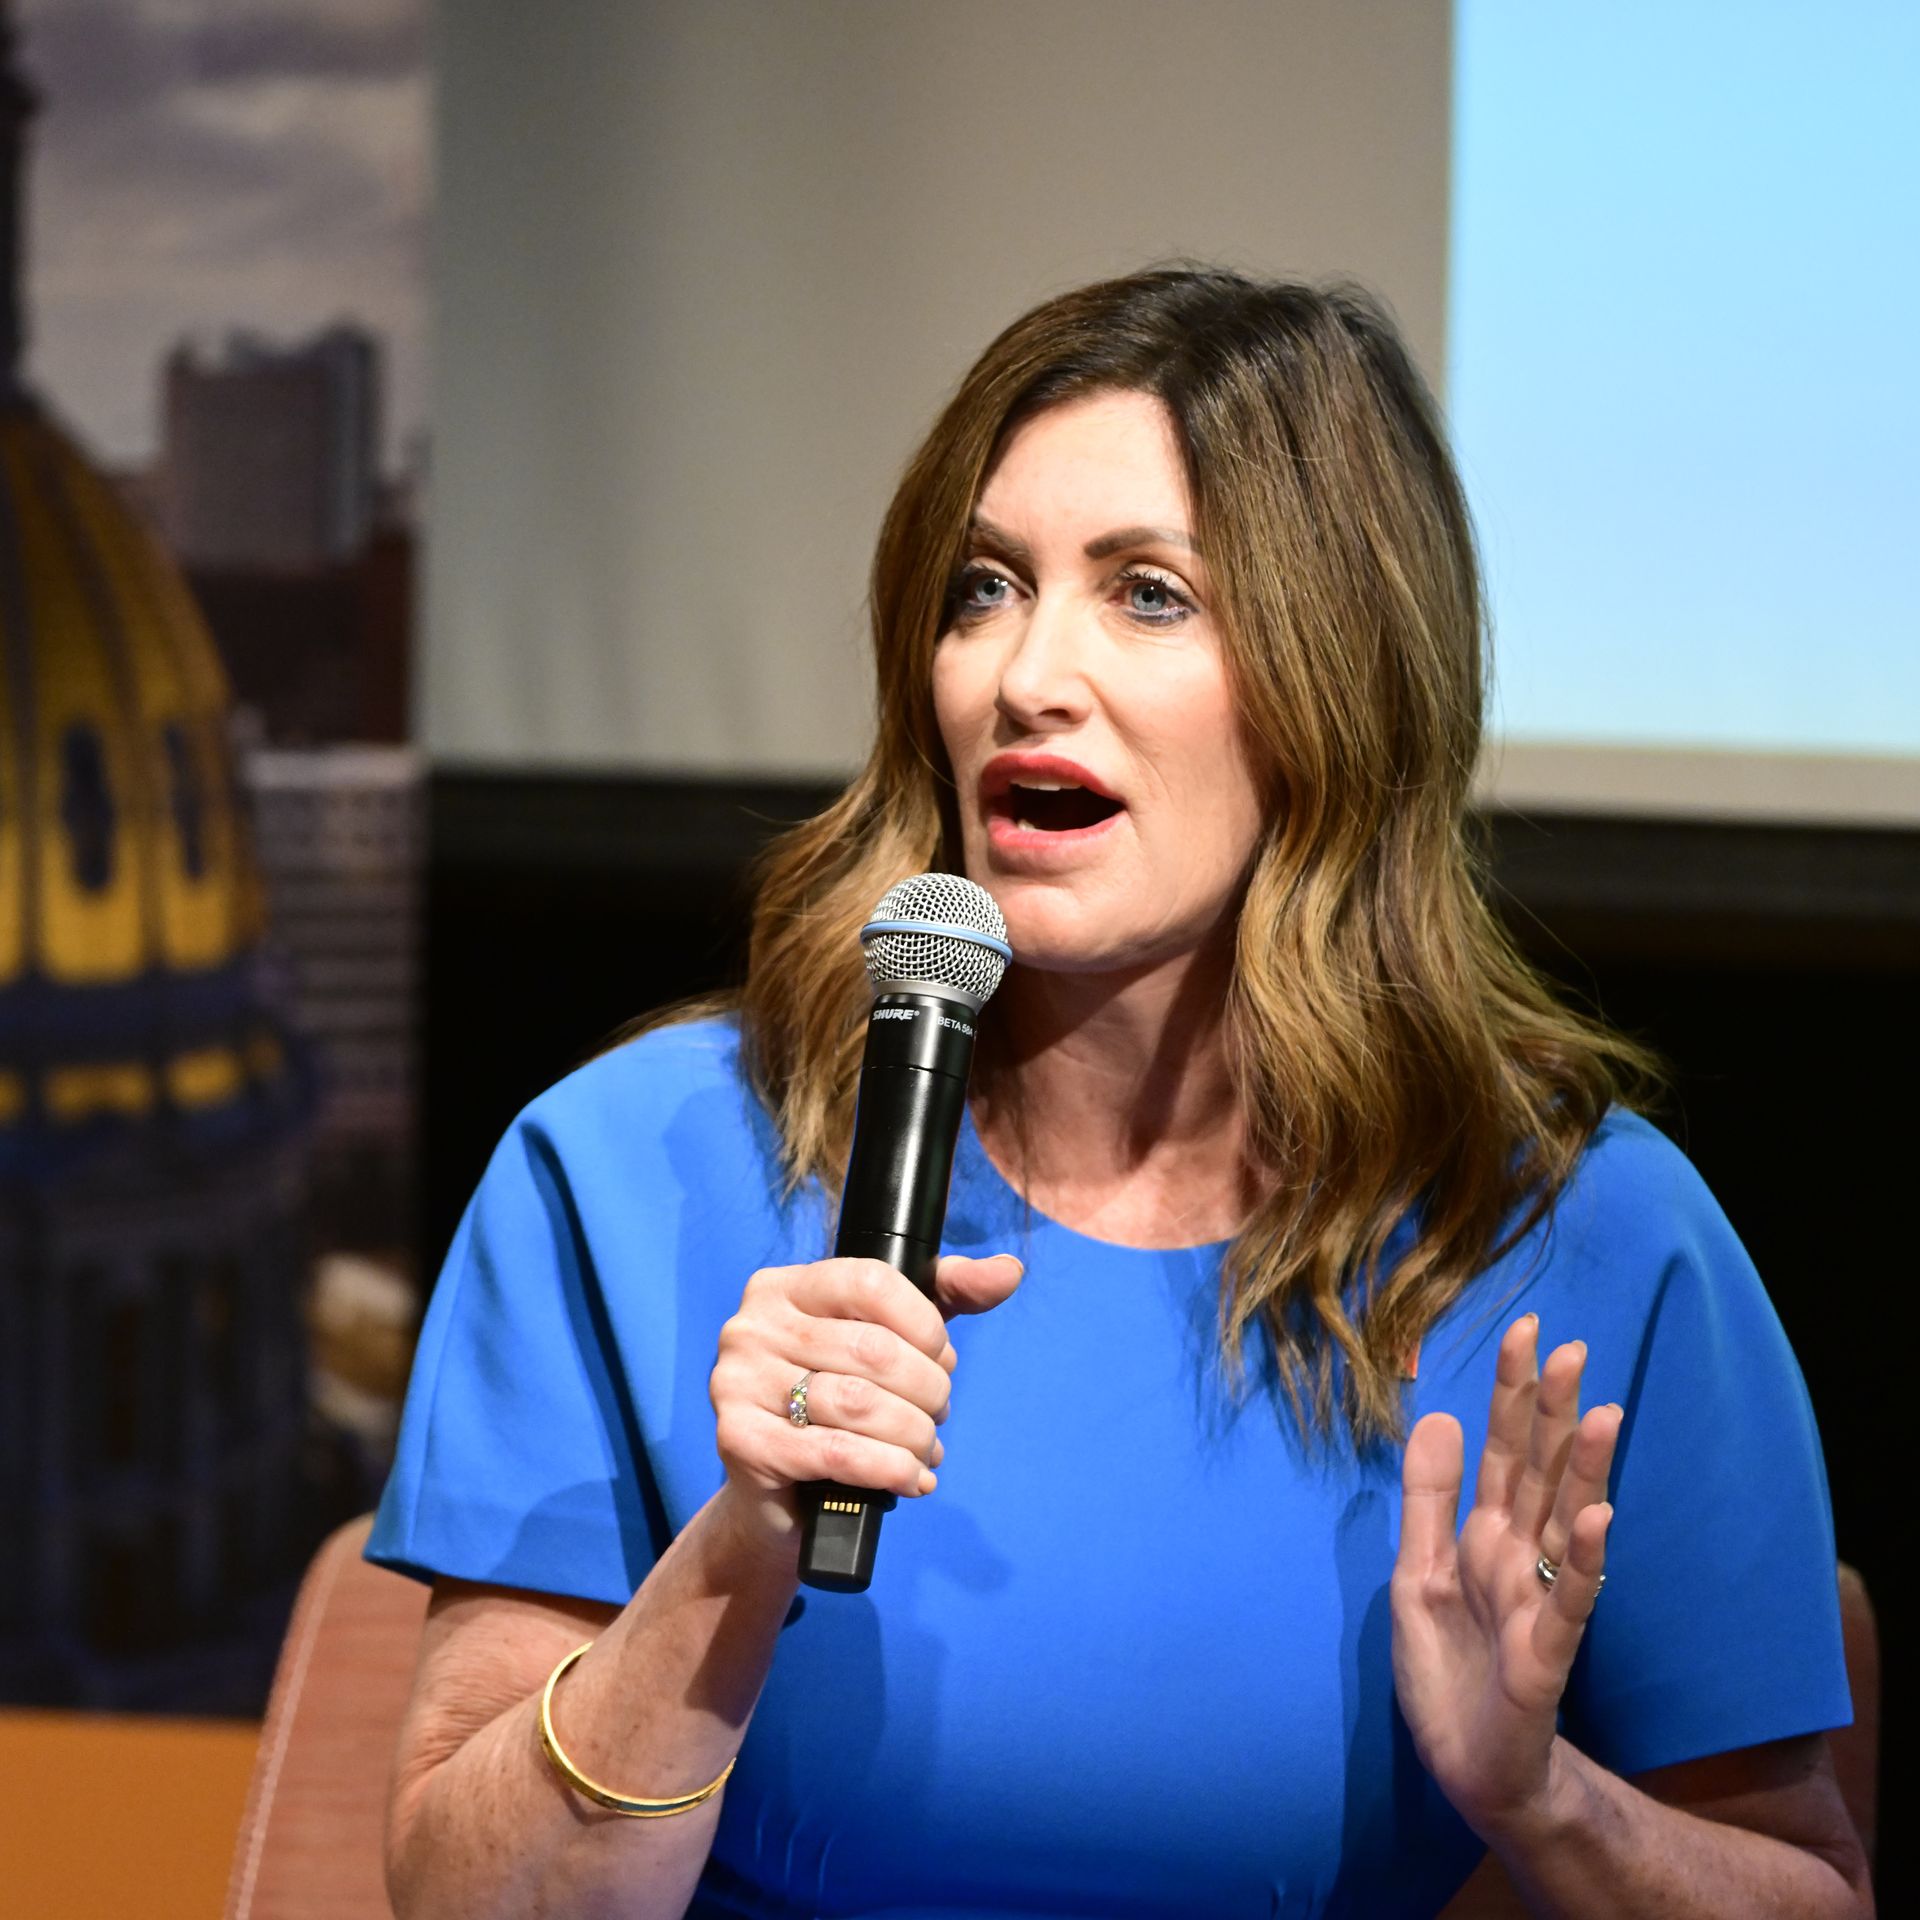  Heidi Ganahl speaks at a forum hosted by Colorado Concern on Friday at the Denver Museum of Nature and Science. Photo: Andy Cross/Denver Post via Getty Images